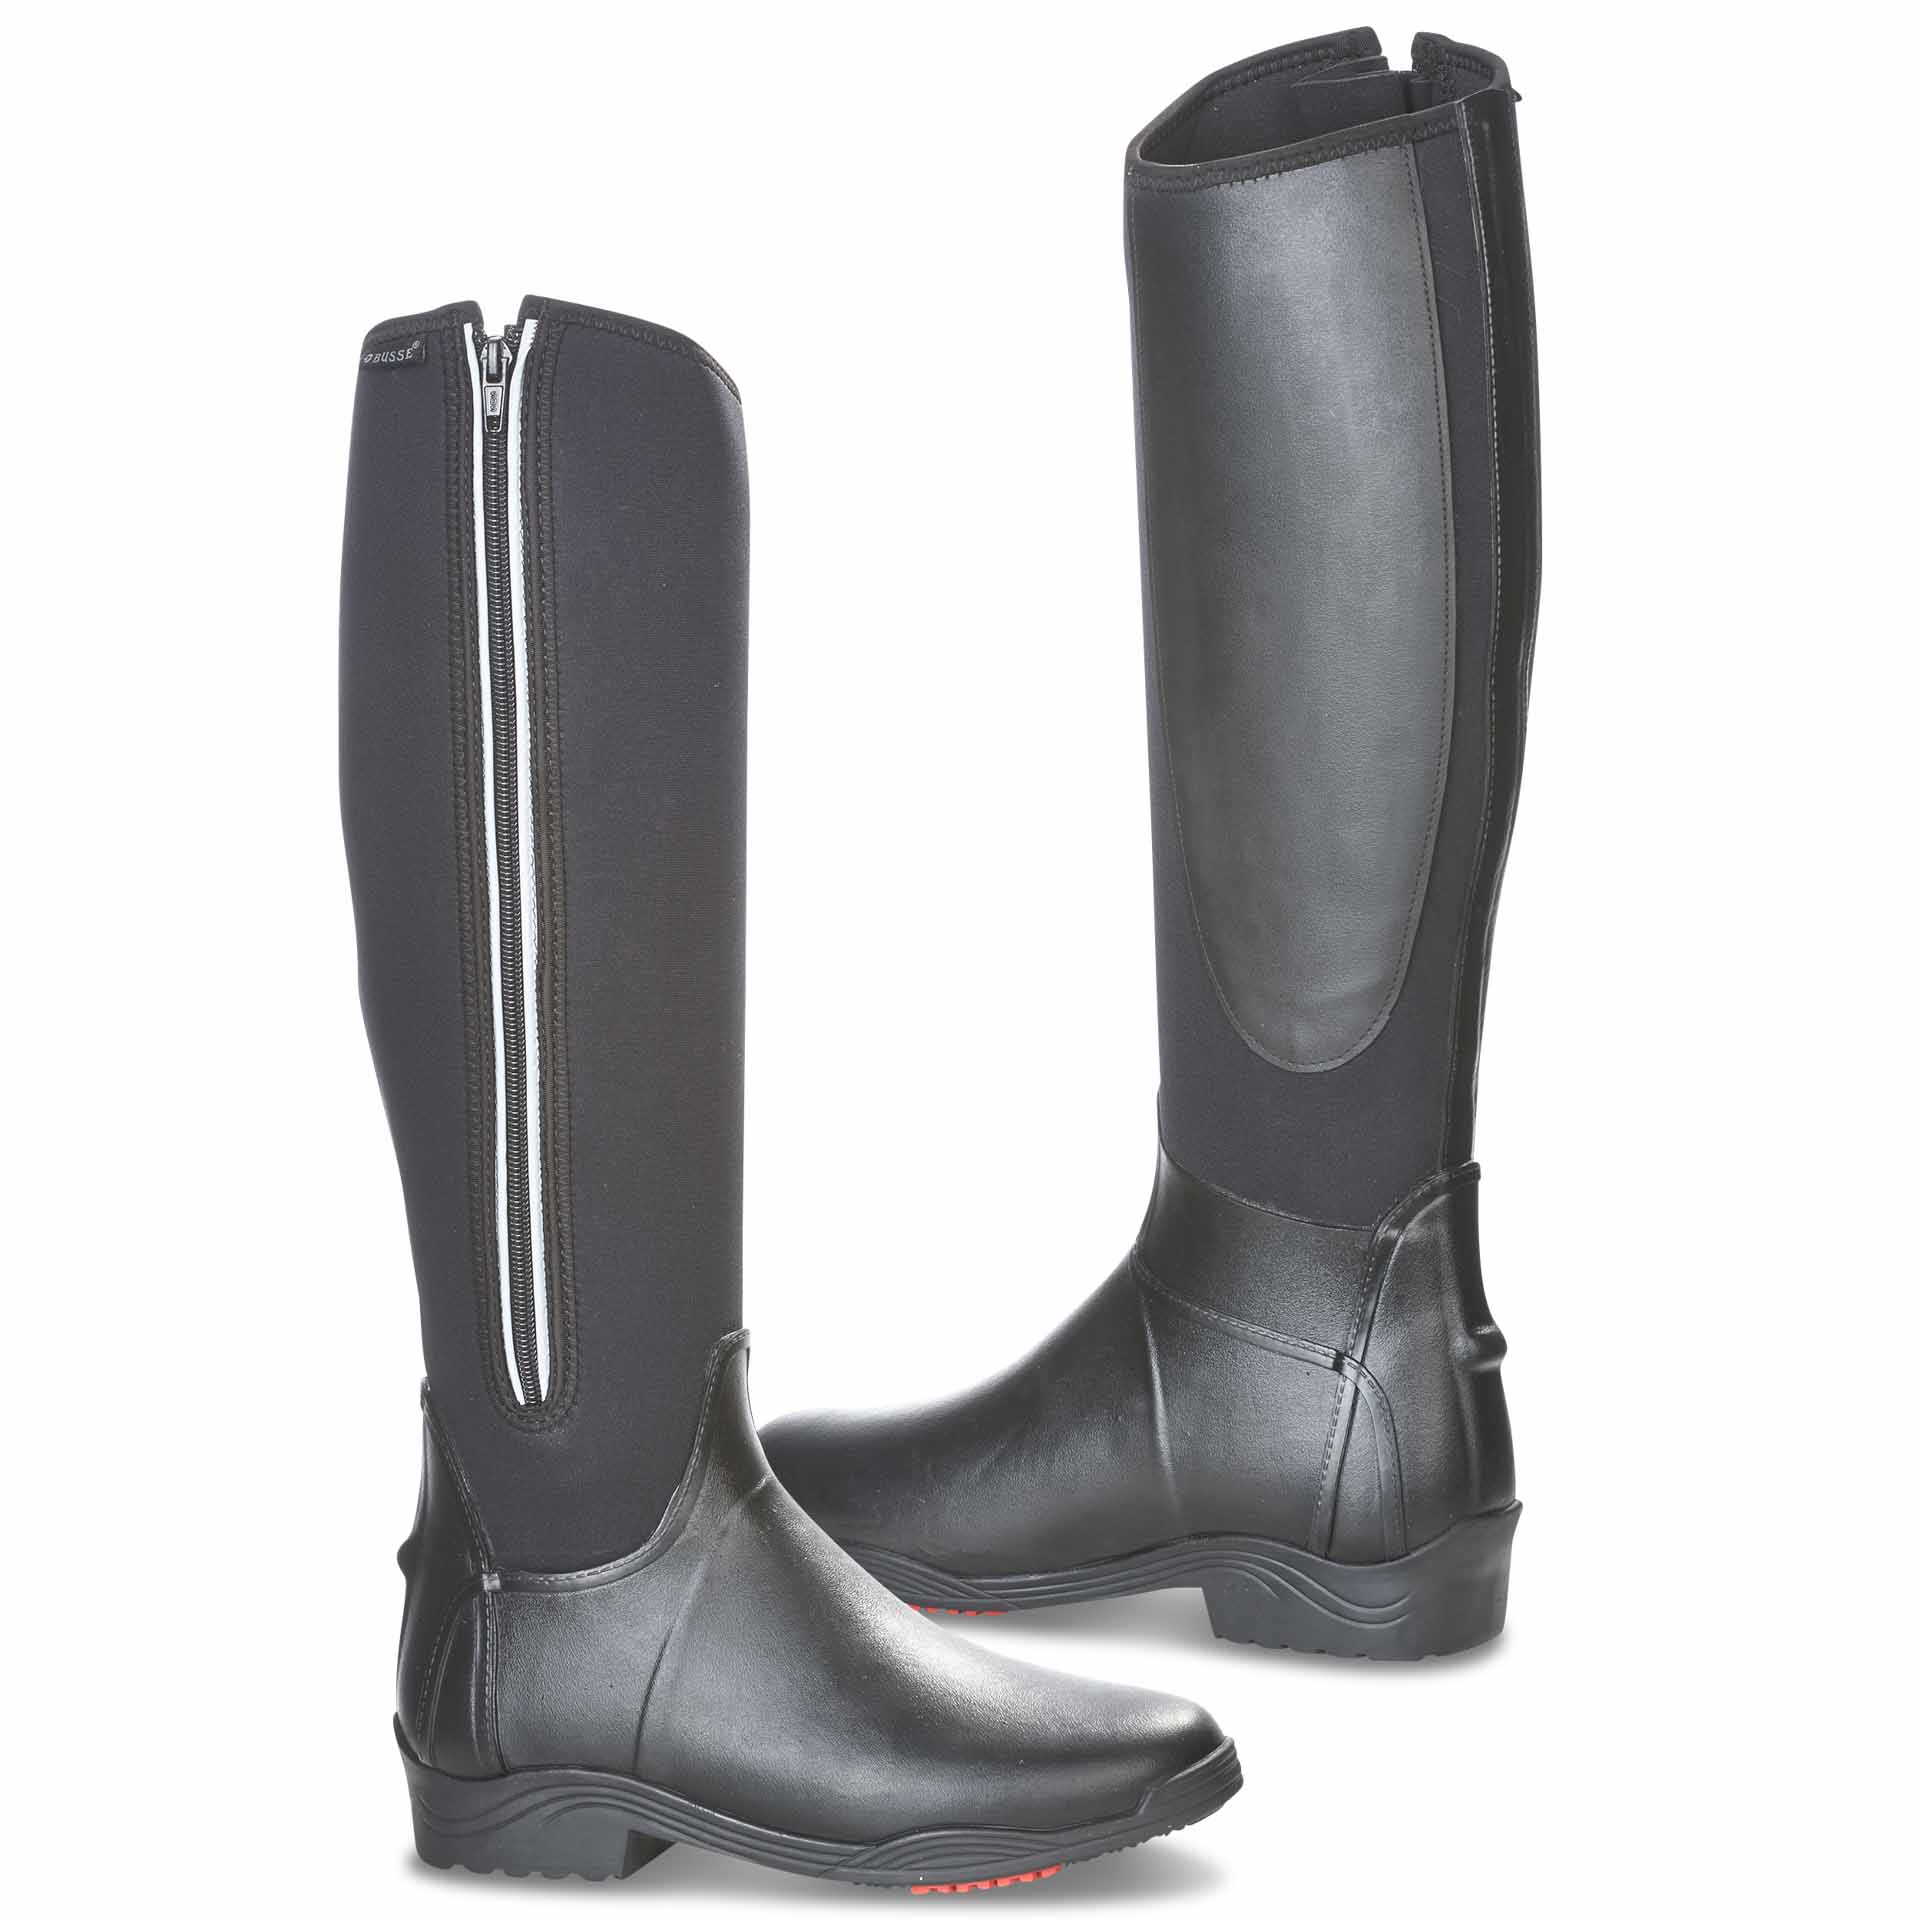 BUSSE Riding Mud Boots CALGARY, black 42 knot